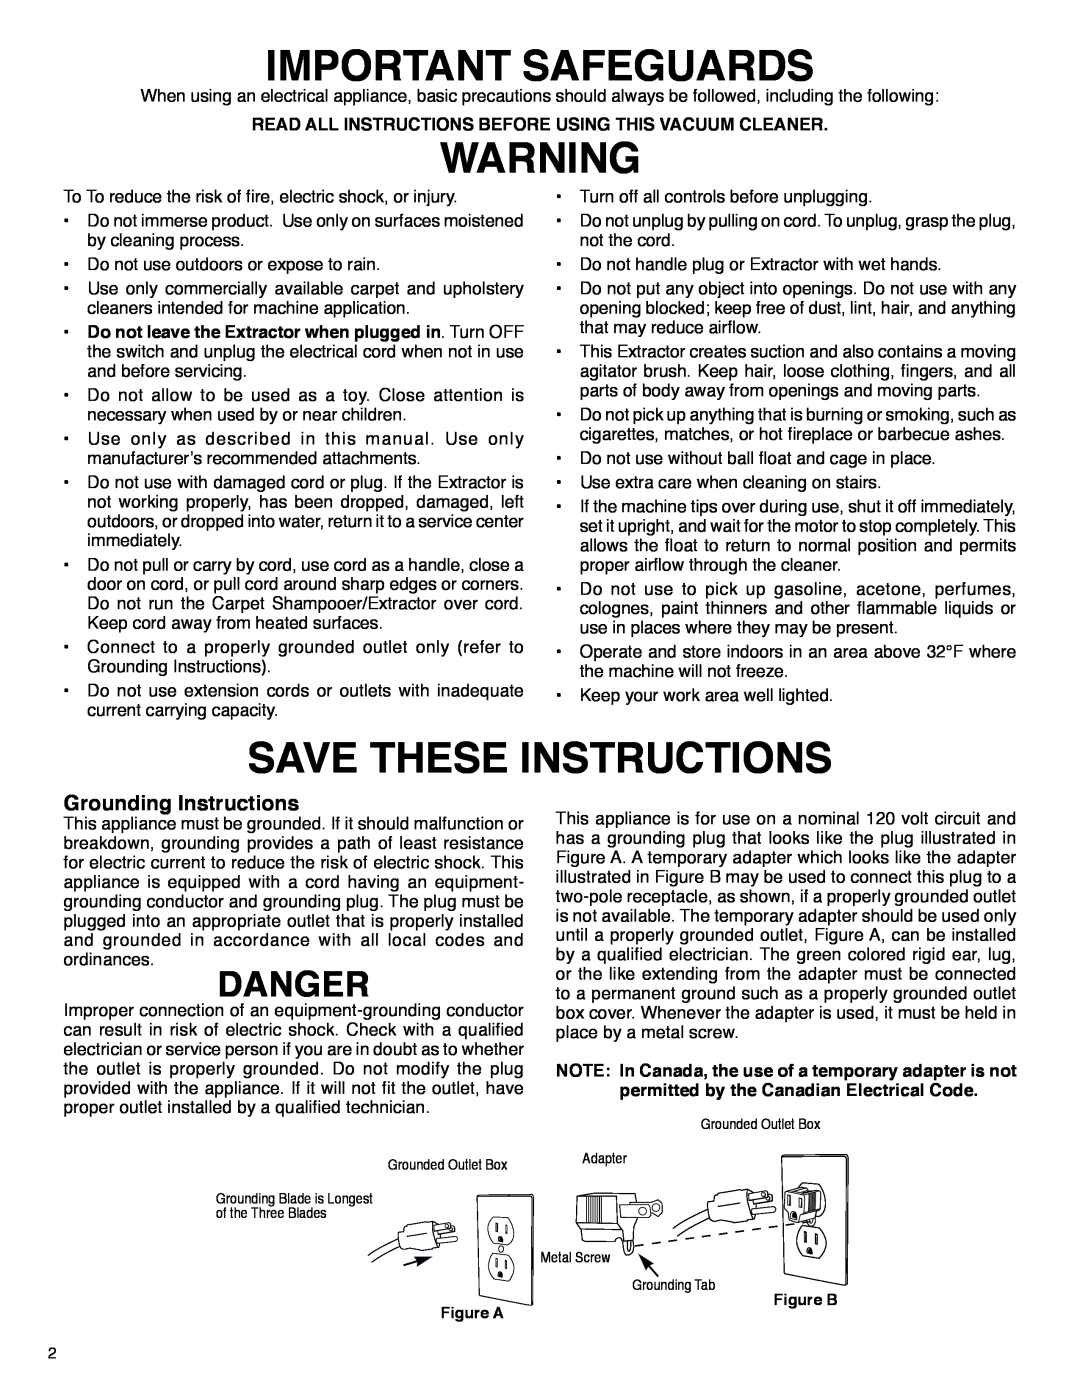 Sanitaire SC6090 Series warranty Important Safeguards, Save These Instructions, Danger, Grounding Instructions 